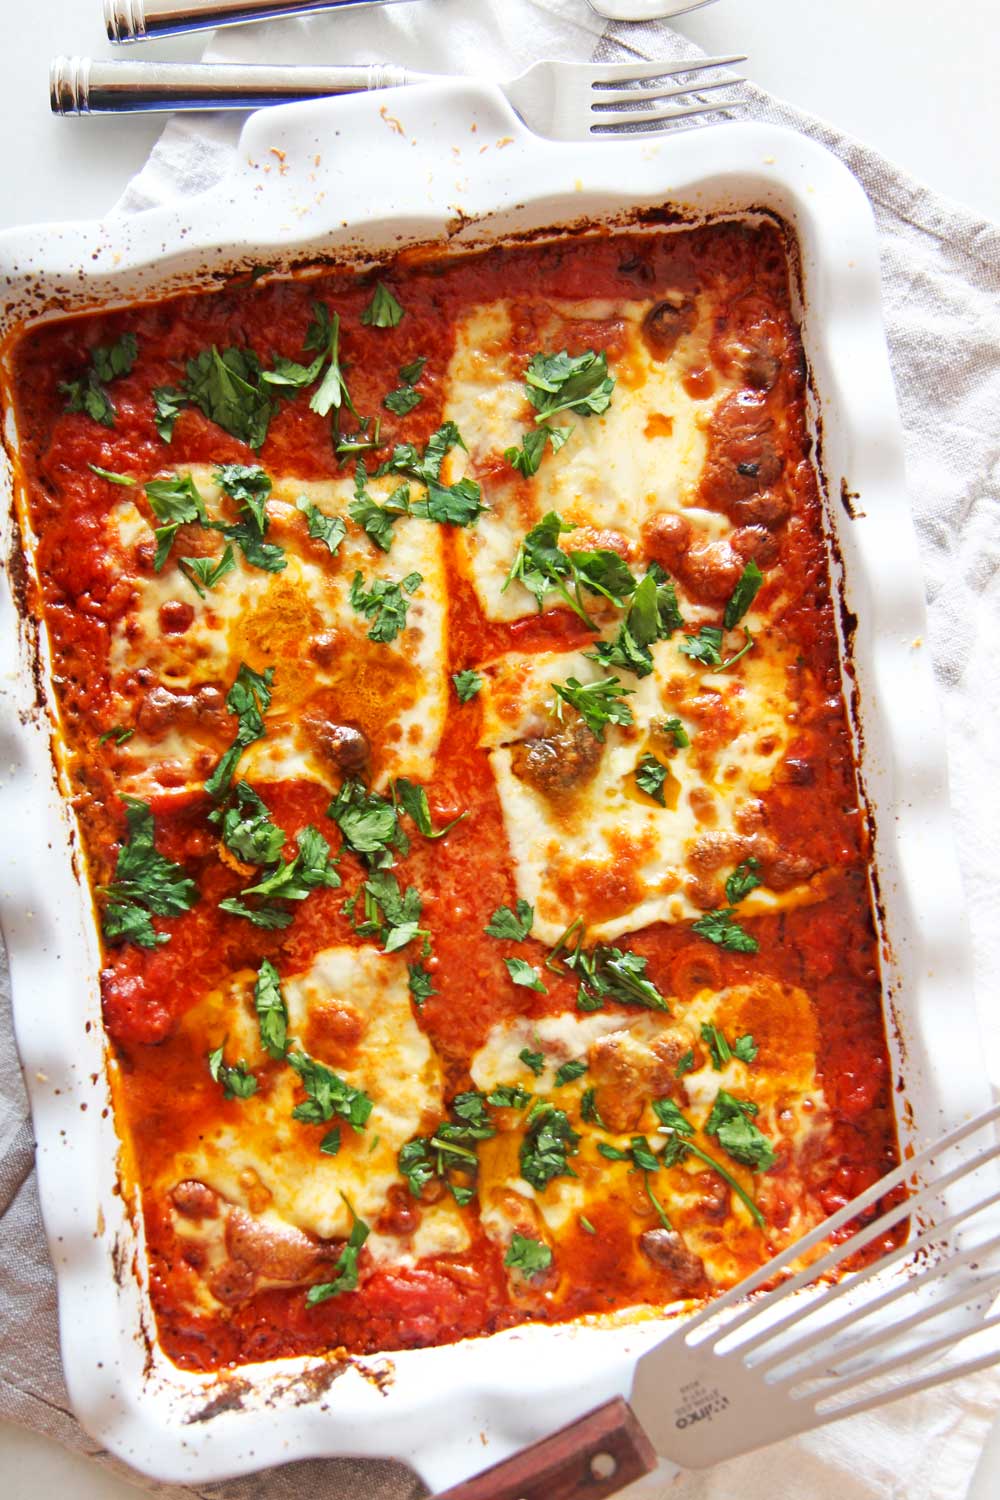 5 Ingredient Cheesy Lasagna. Ricotta, marinara, mozzarella, pesto, and frozen ravioli is all you need. This is a perfect busy night pasta dinner. At my hiome we call it Italian recipe night. Happy cooking! www.chophappy.com #lasagna #5ingredients